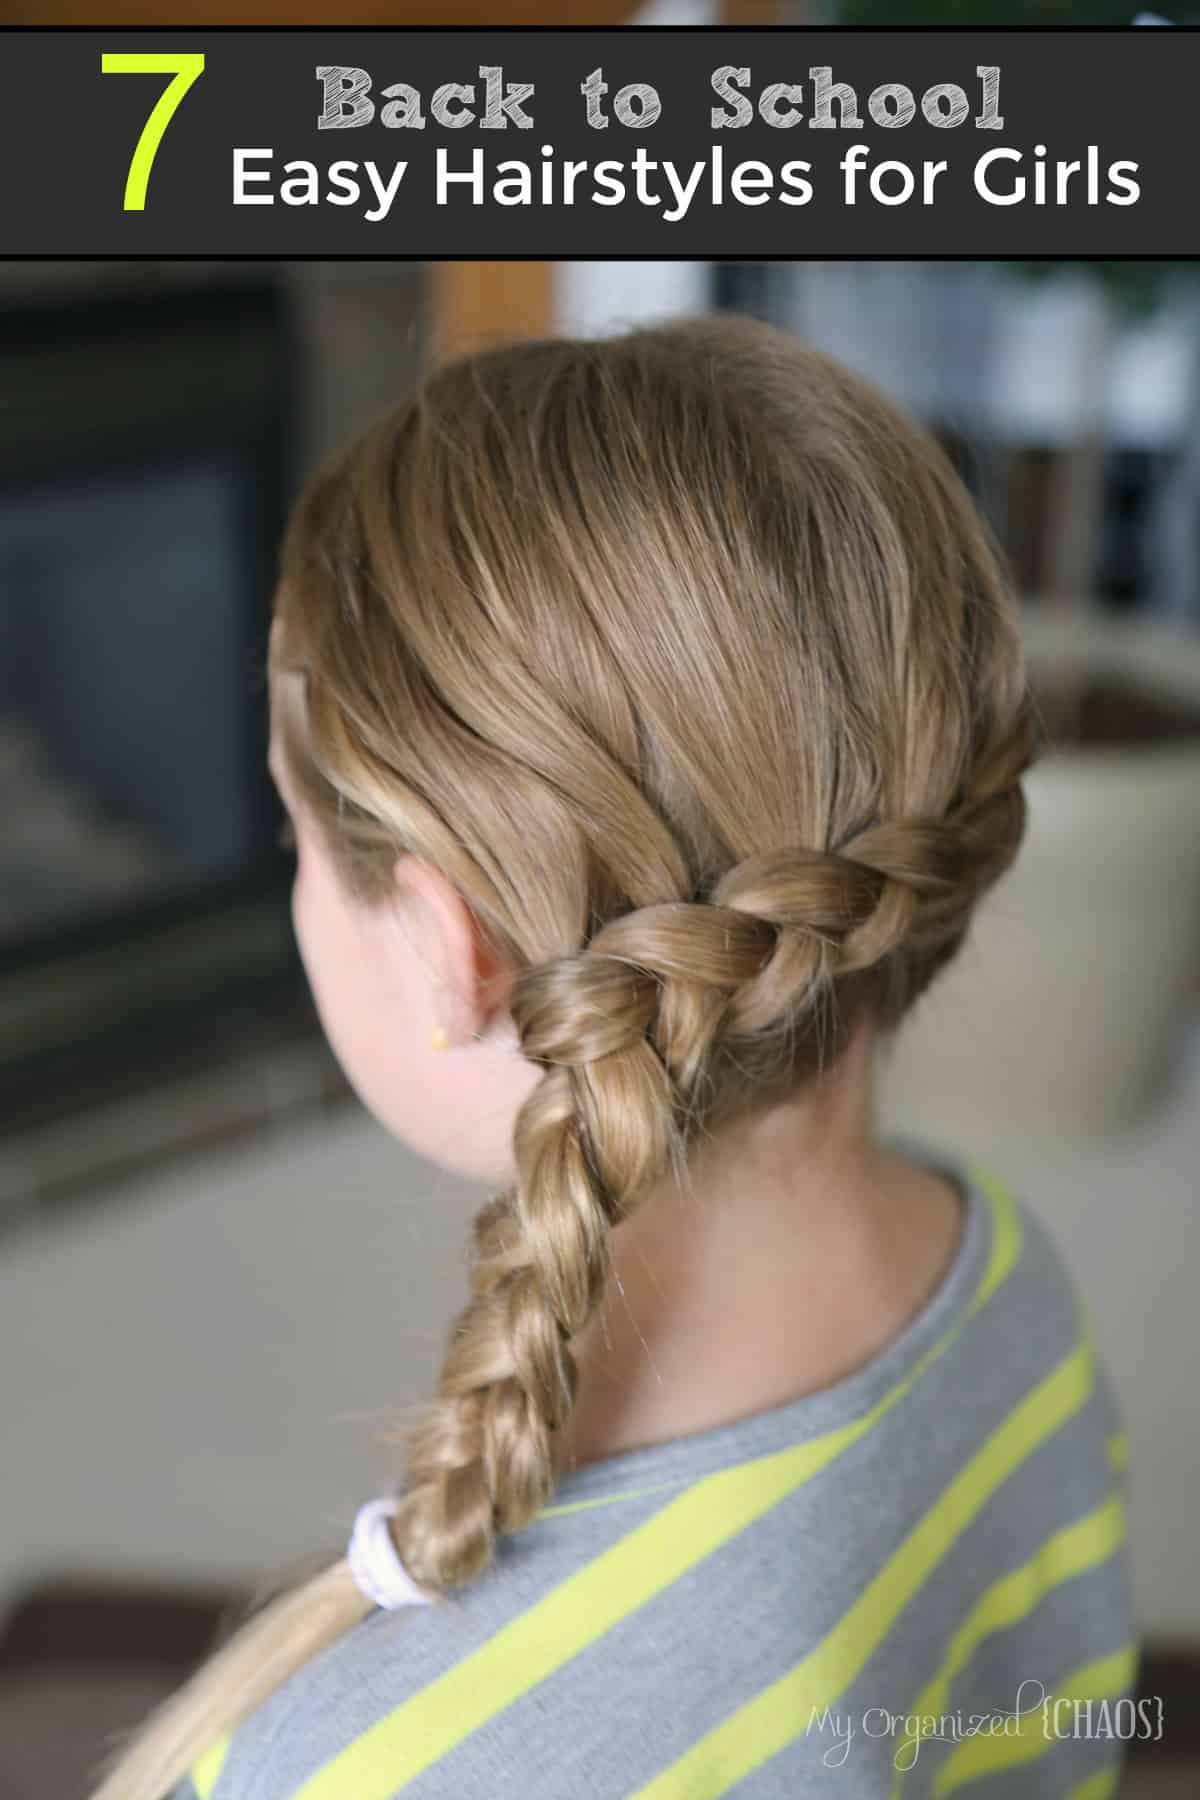 Girls Hairstyles For School
 7 Back to School Easy Hairstyles for Girls